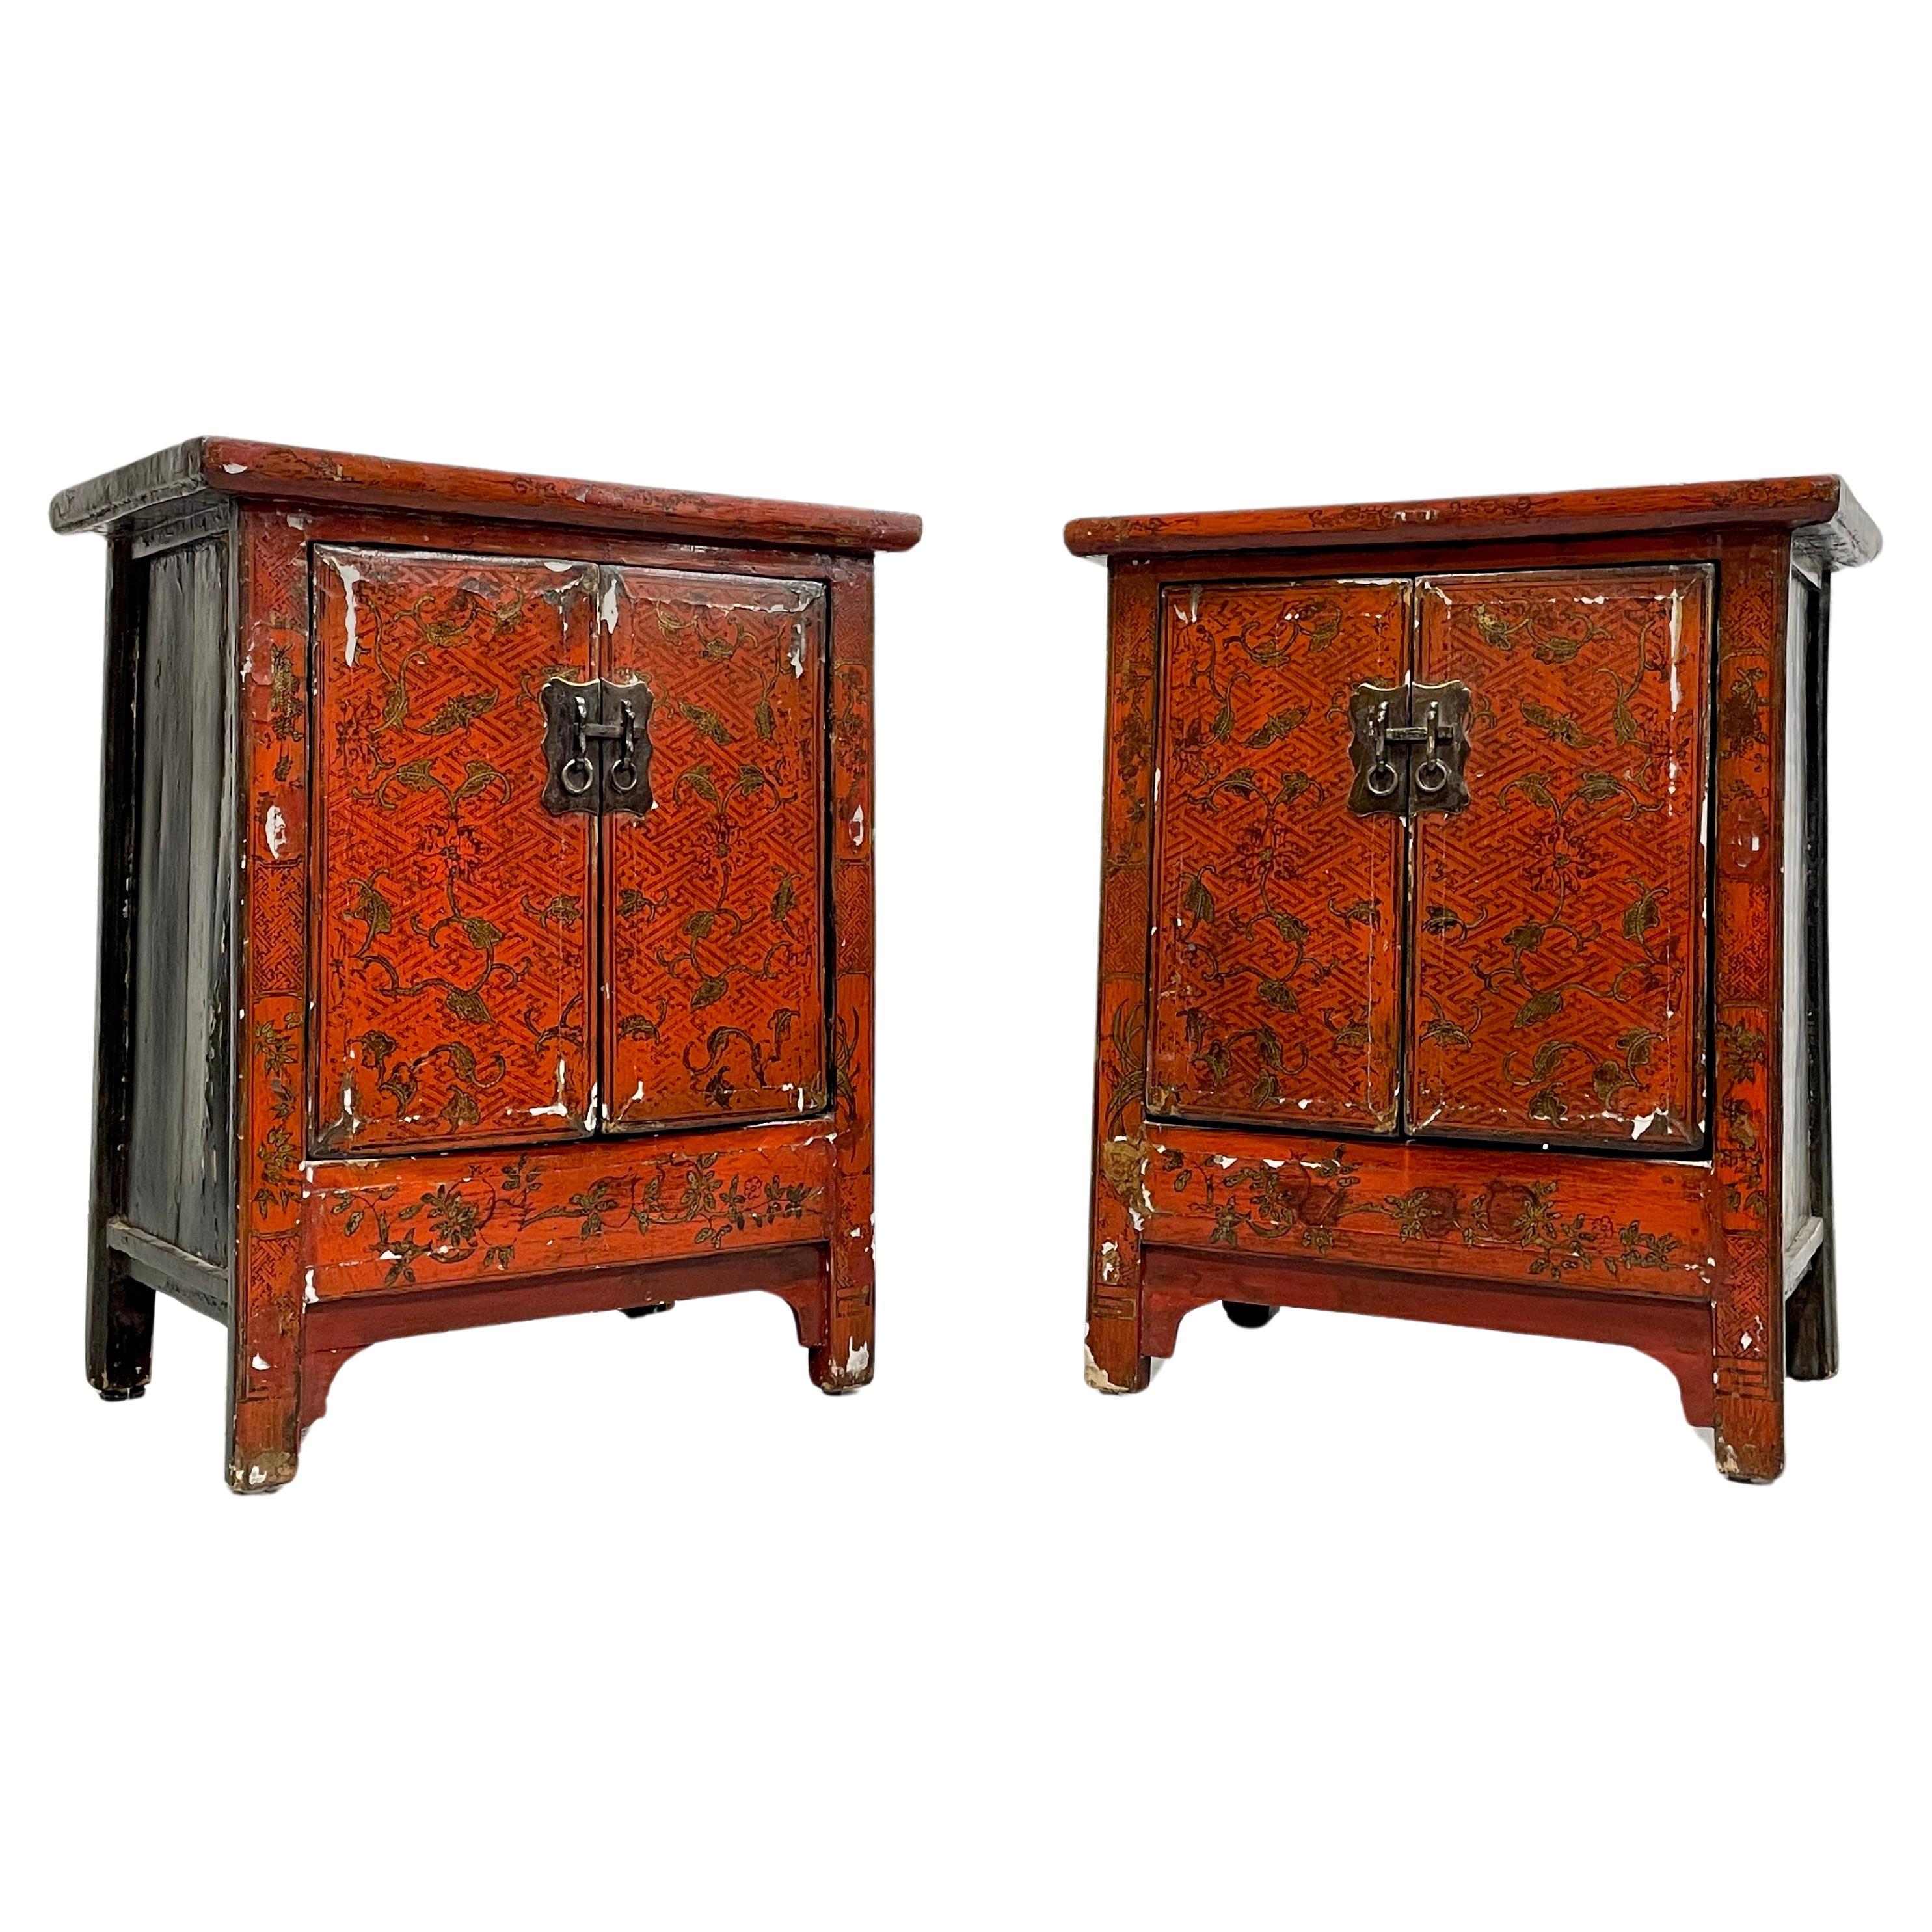 Antique Red Lacquer Chinese "Marriage Cabinets" STORAGE CHESTS, a PAIR